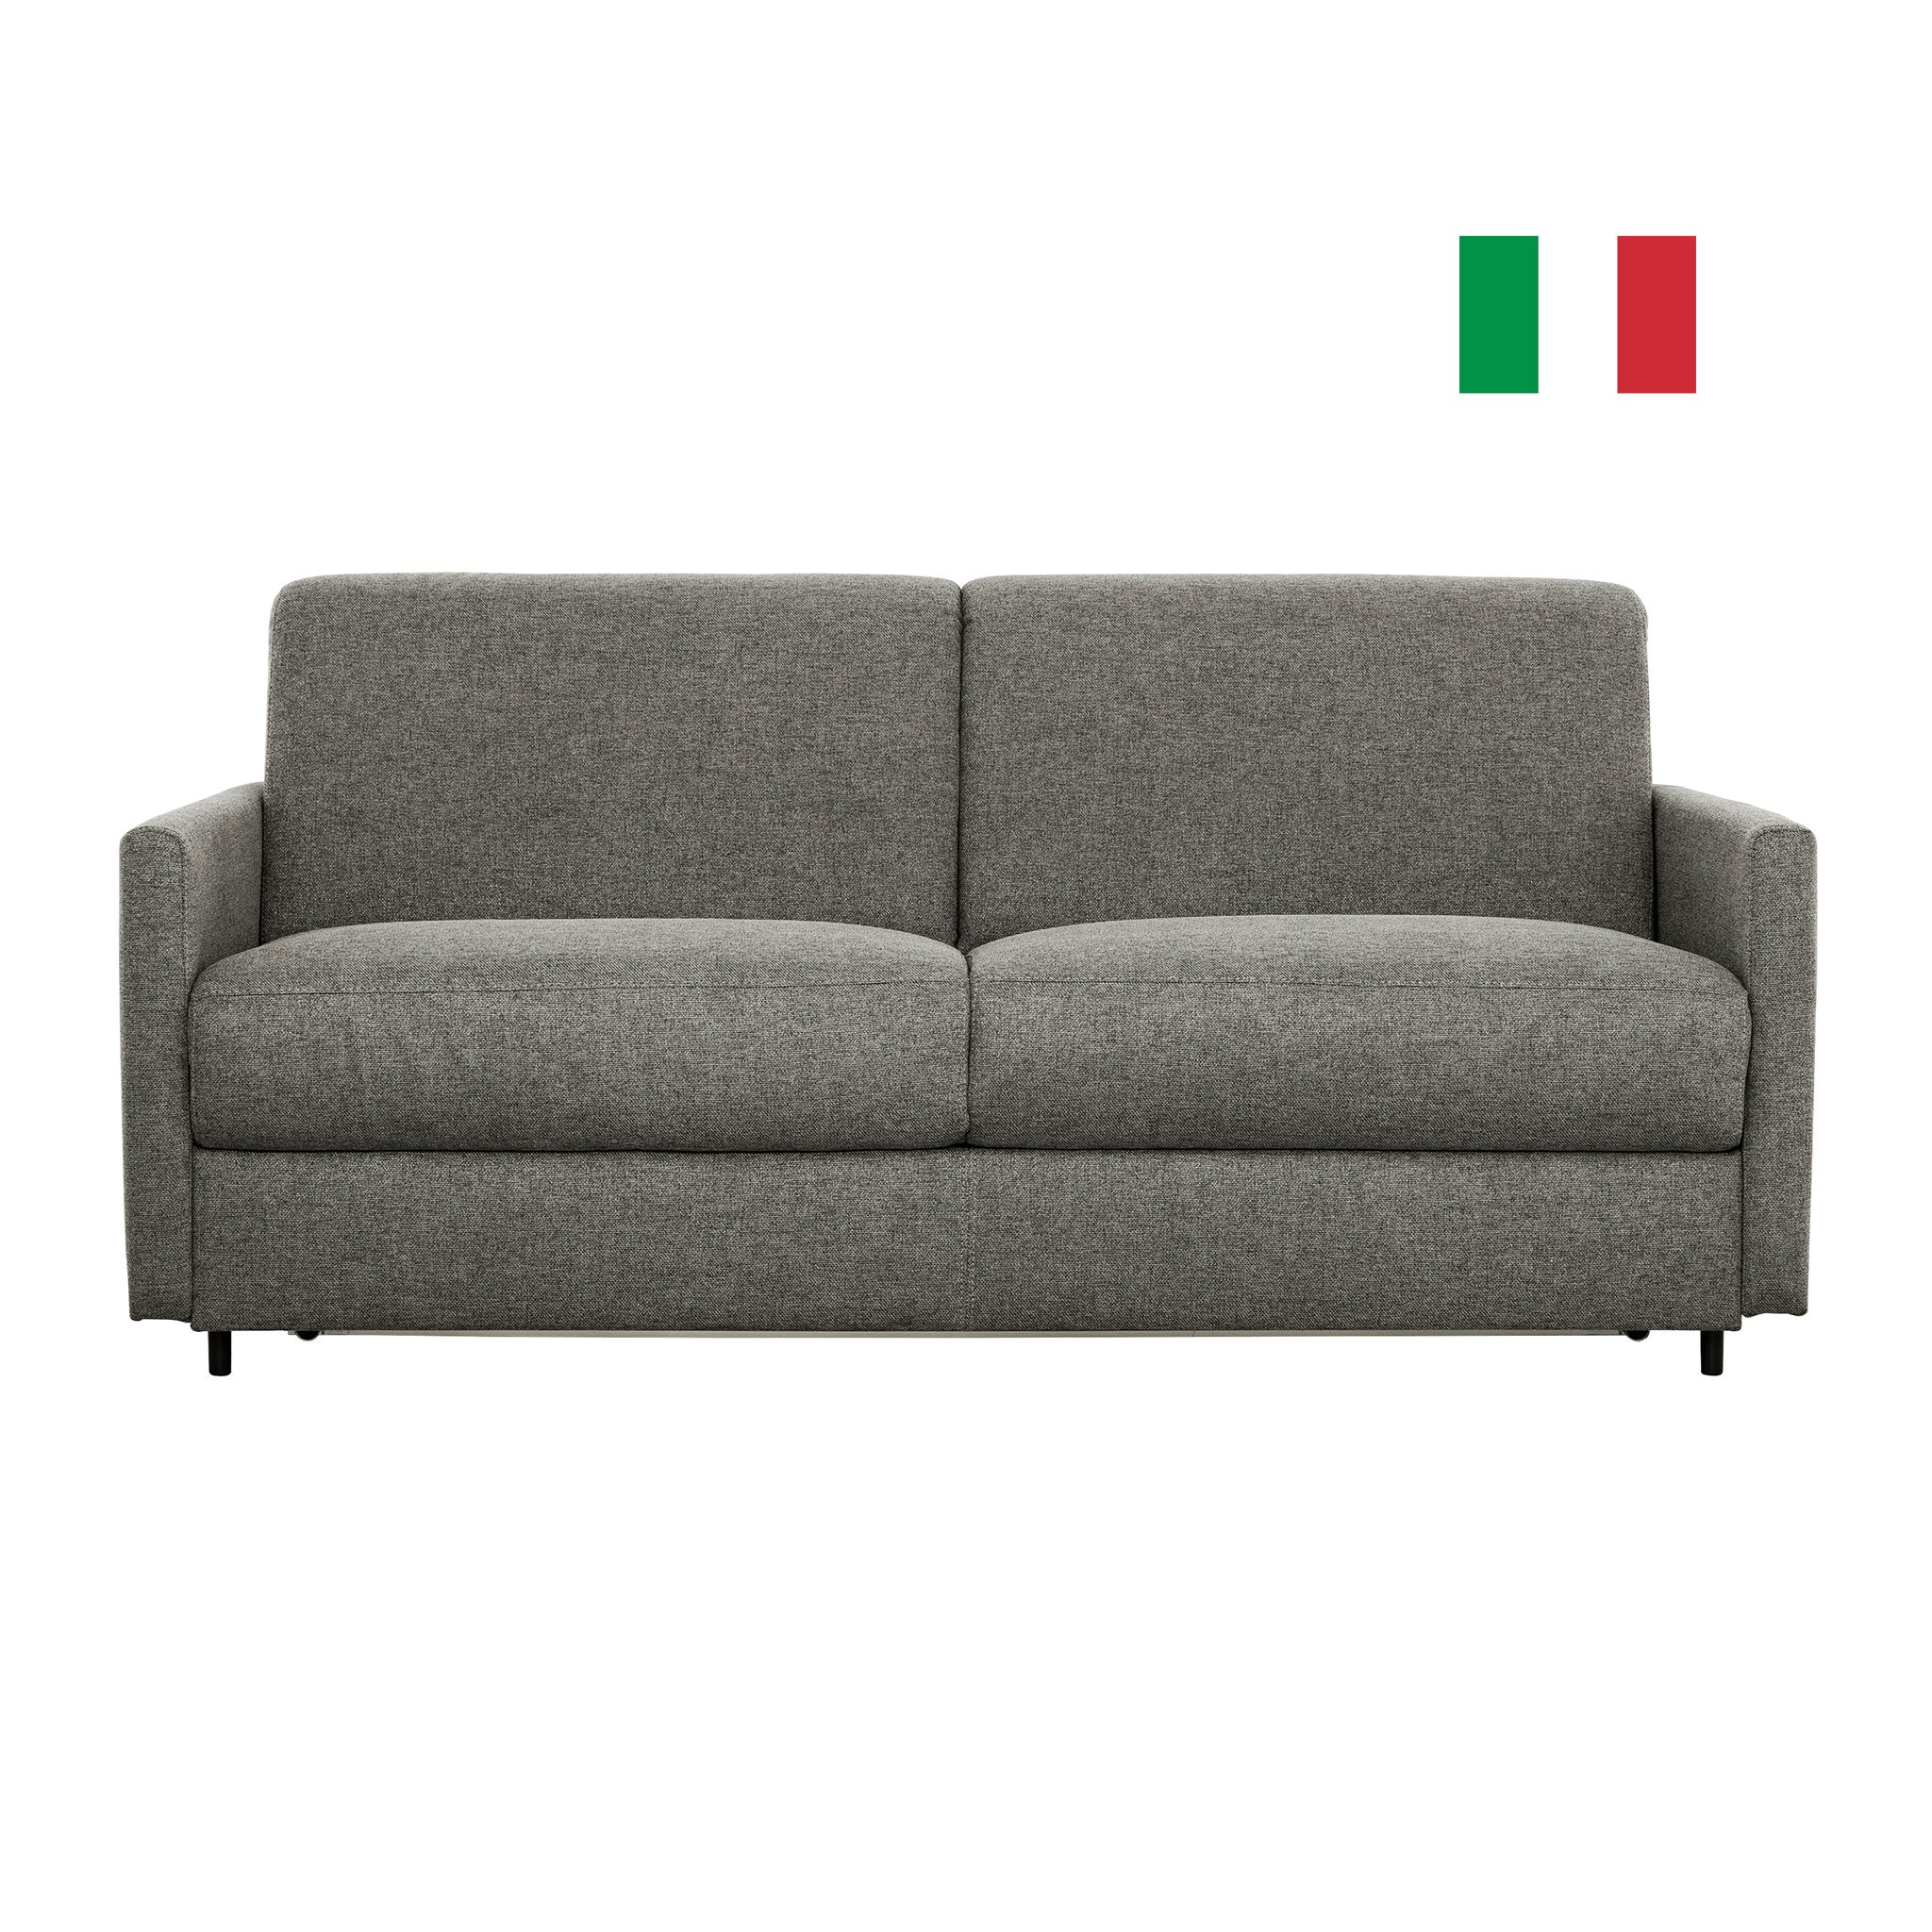 Benito Full Sofabed